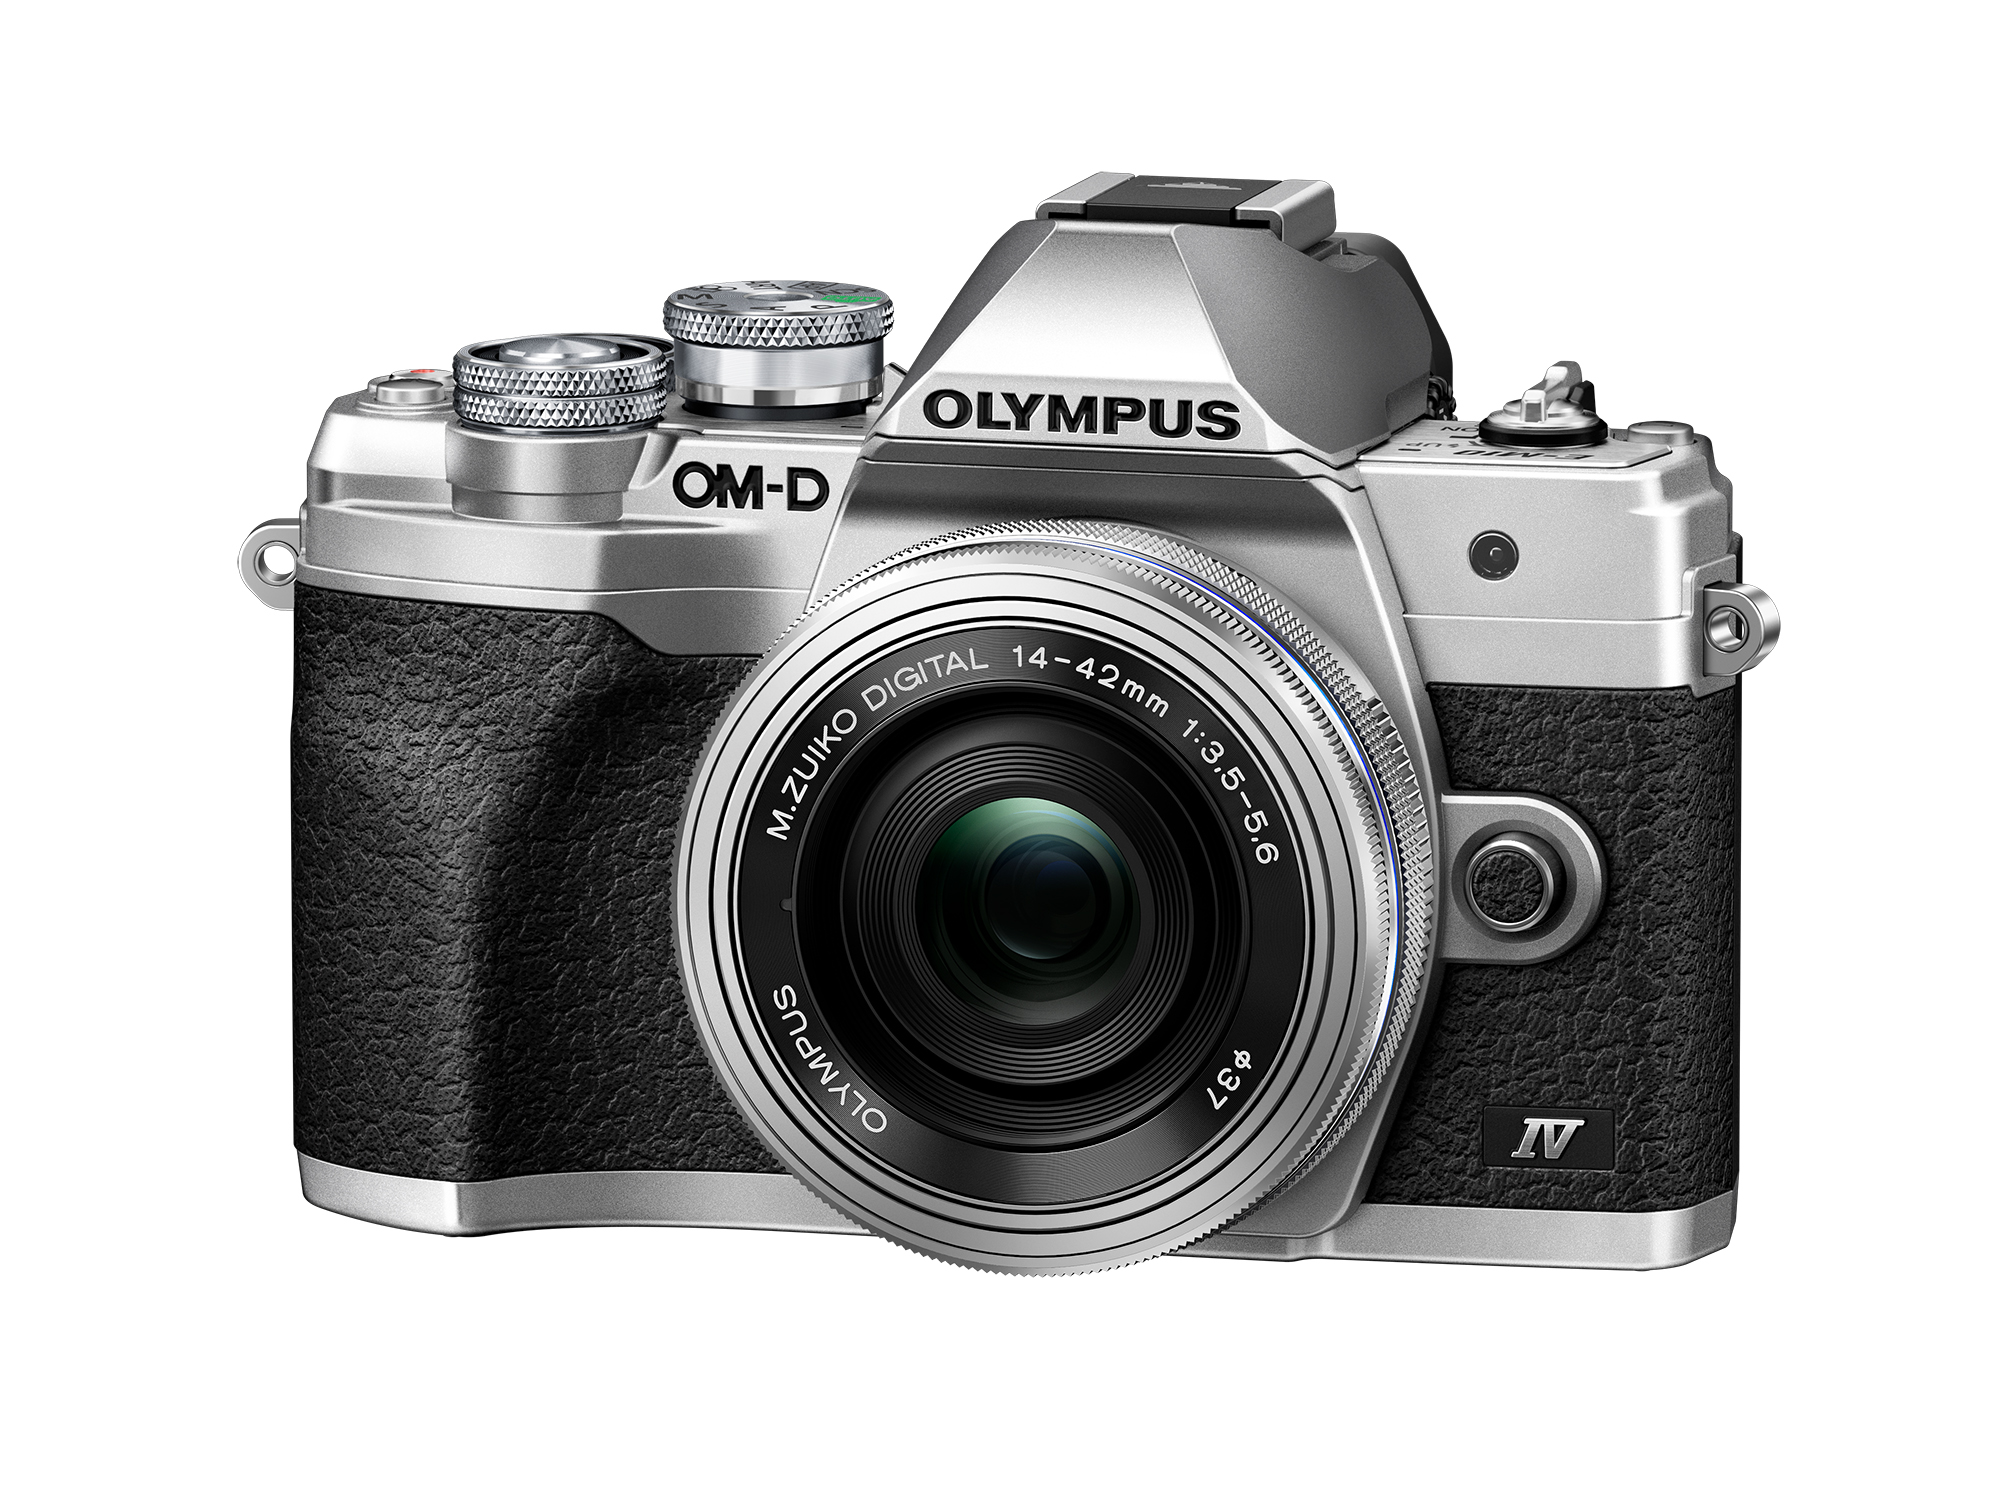 Olympus OM-D E-M10 Mark IV with 14-42EZ Wide Angle Mirrorless Lens Silver Kit V207132SU000